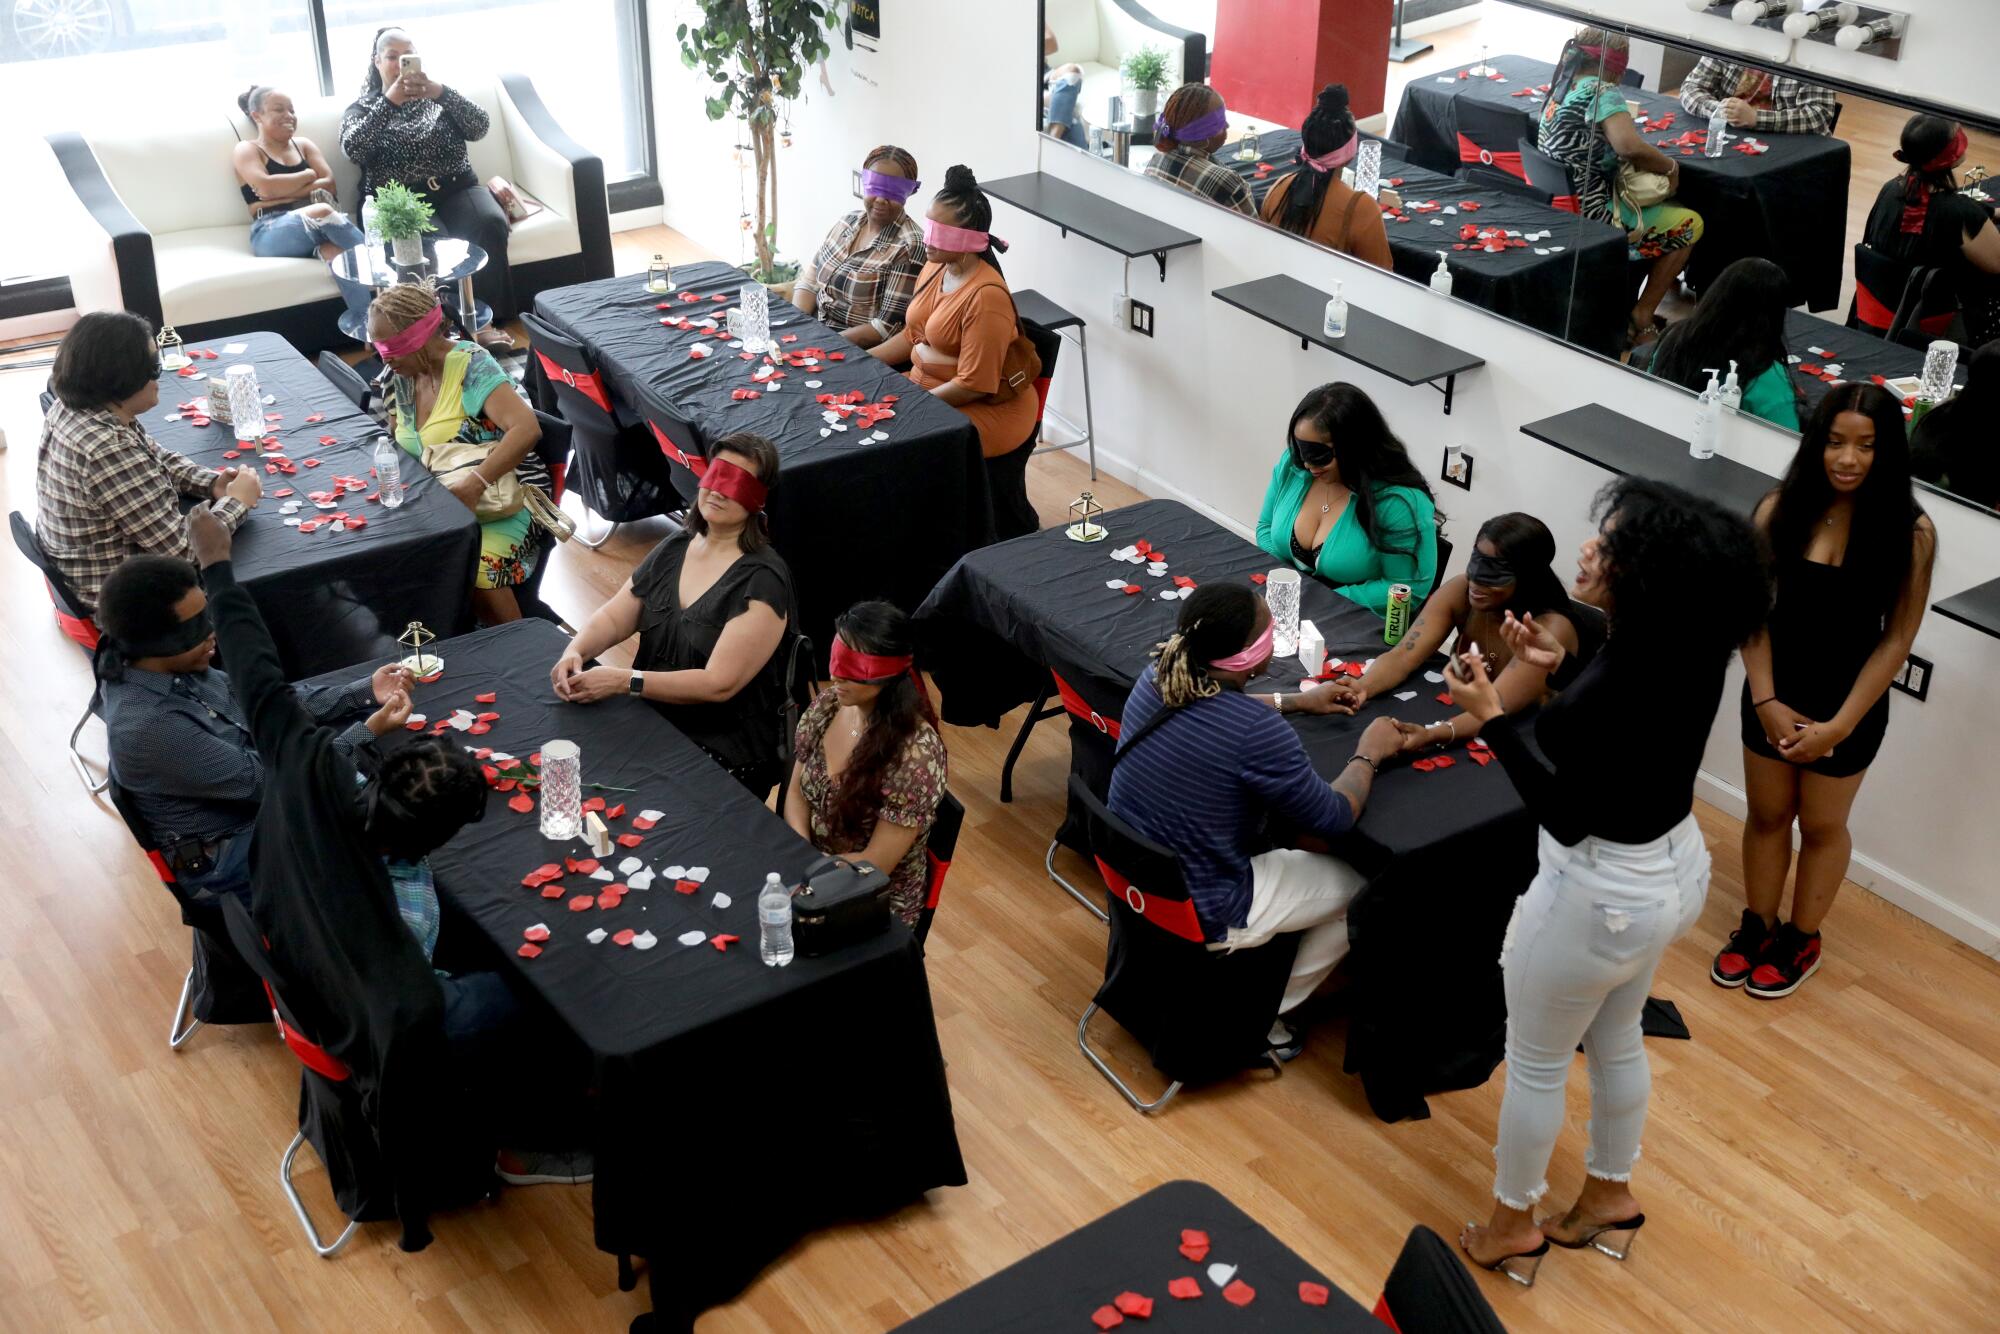 Singles date sight unseen at this L.A. speed-dating experience - Los  Angeles Times